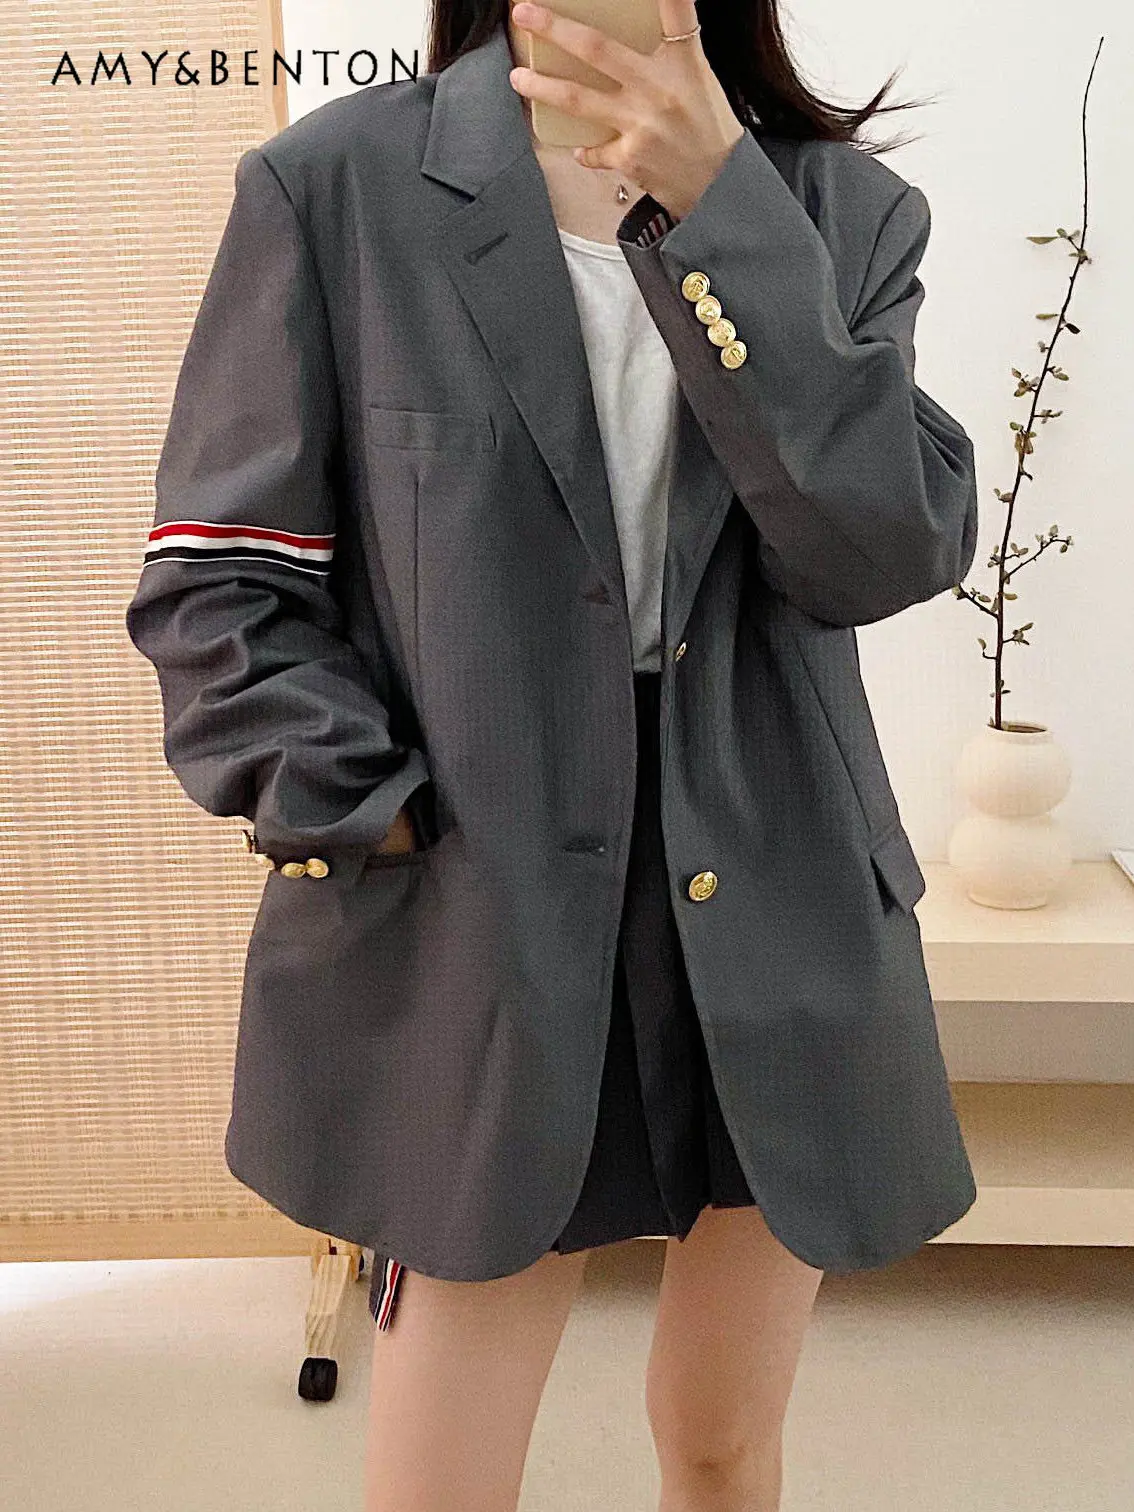 

Early Autumn New Couple's Suit Casual Ol Workplace British Style Suit Jacket Fashion Long Sleeve Women's Loose Gray Blazer Coat